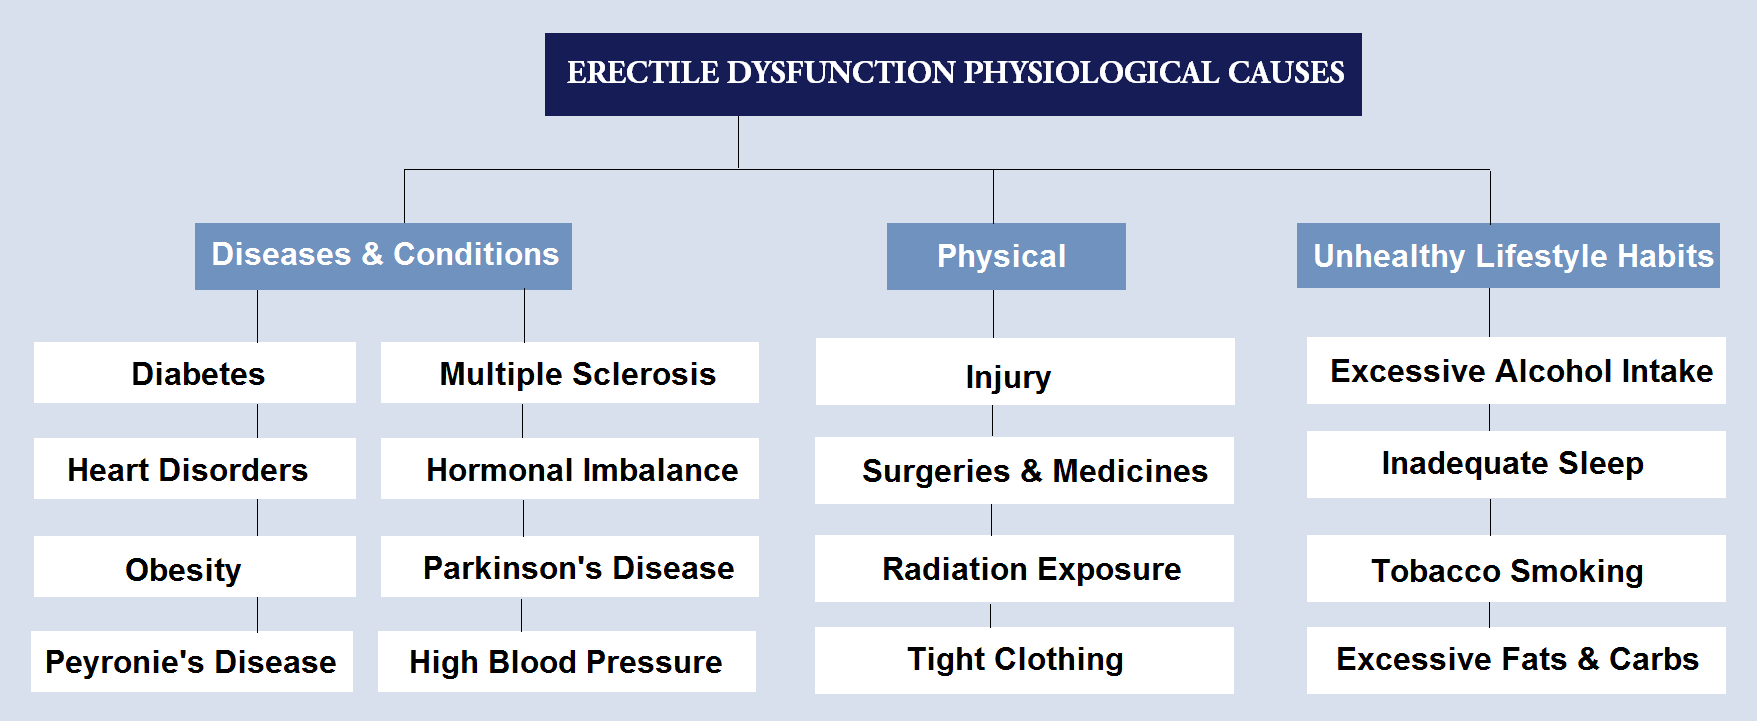 erectile dysfunction causes chart